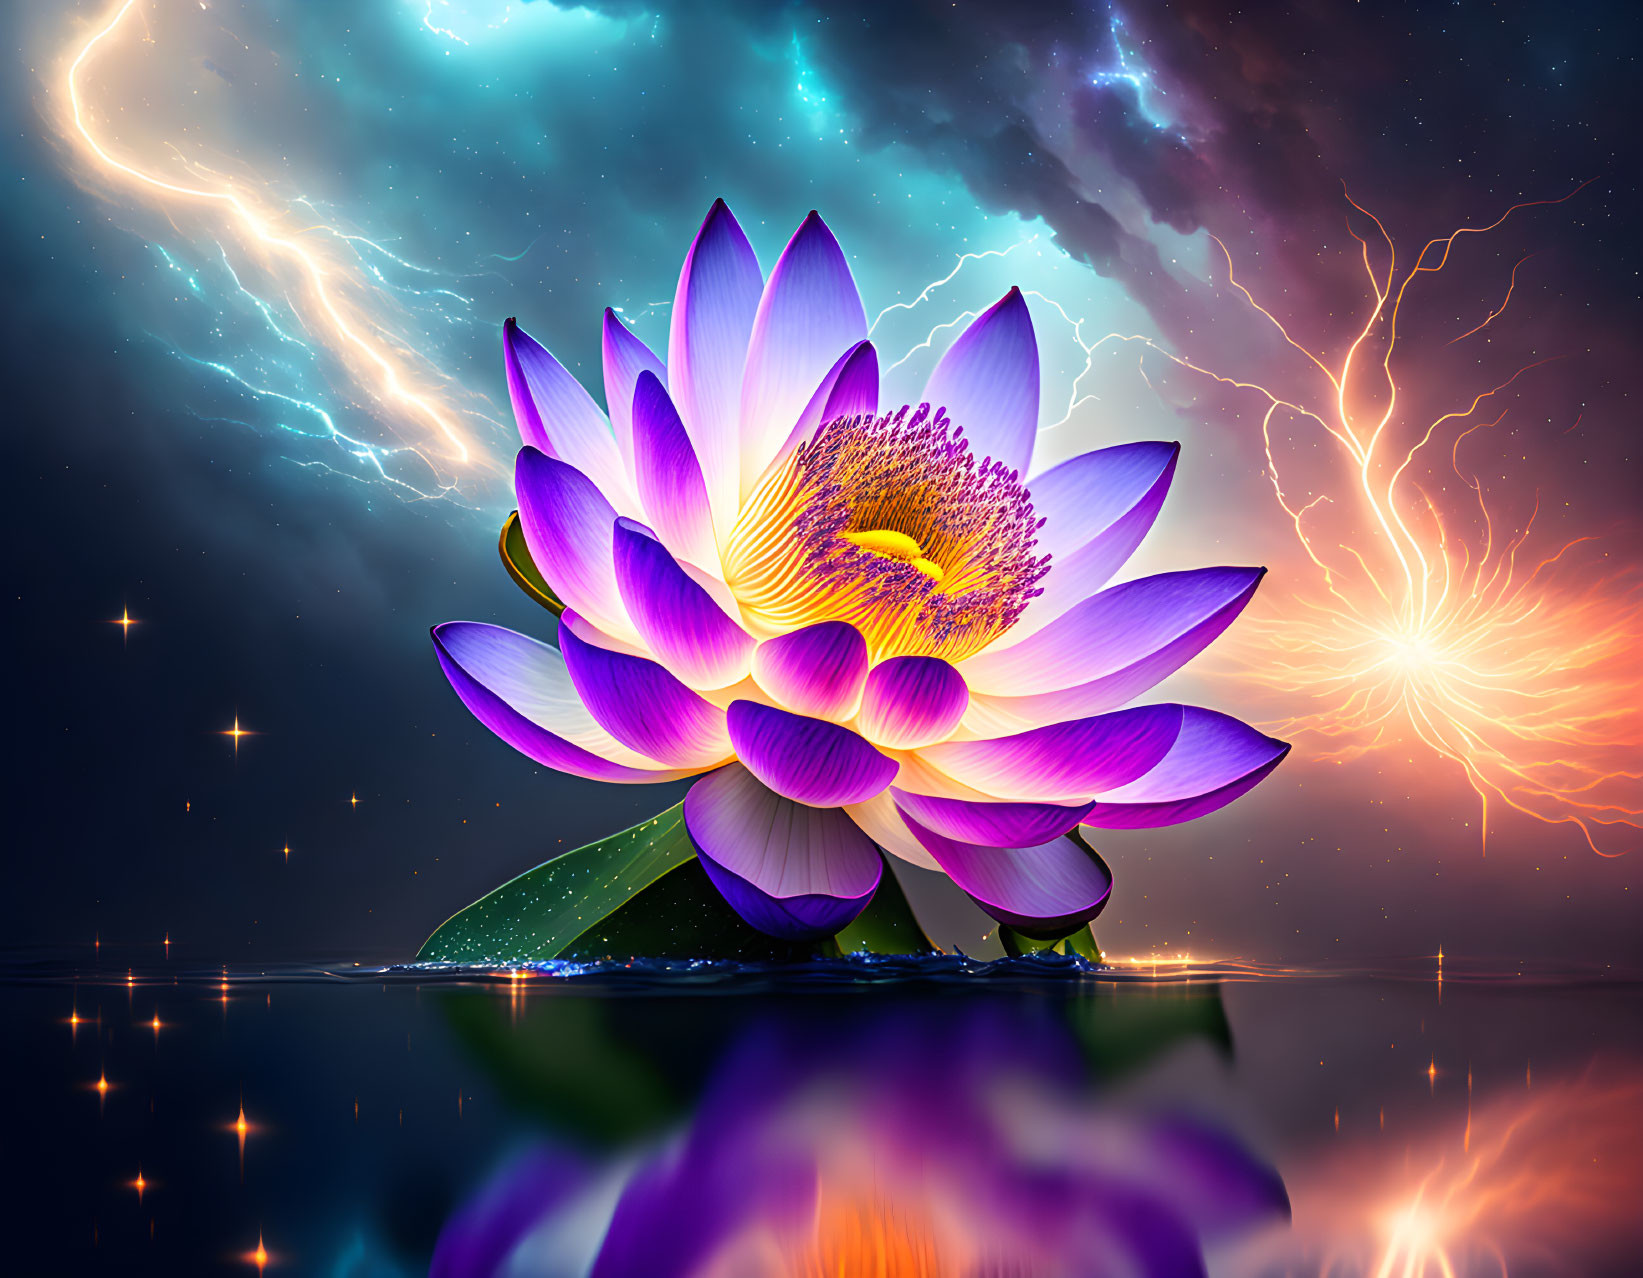 Colorful Lotus Flower Blooms in Starry Night Sky with Lightning and Water Reflection